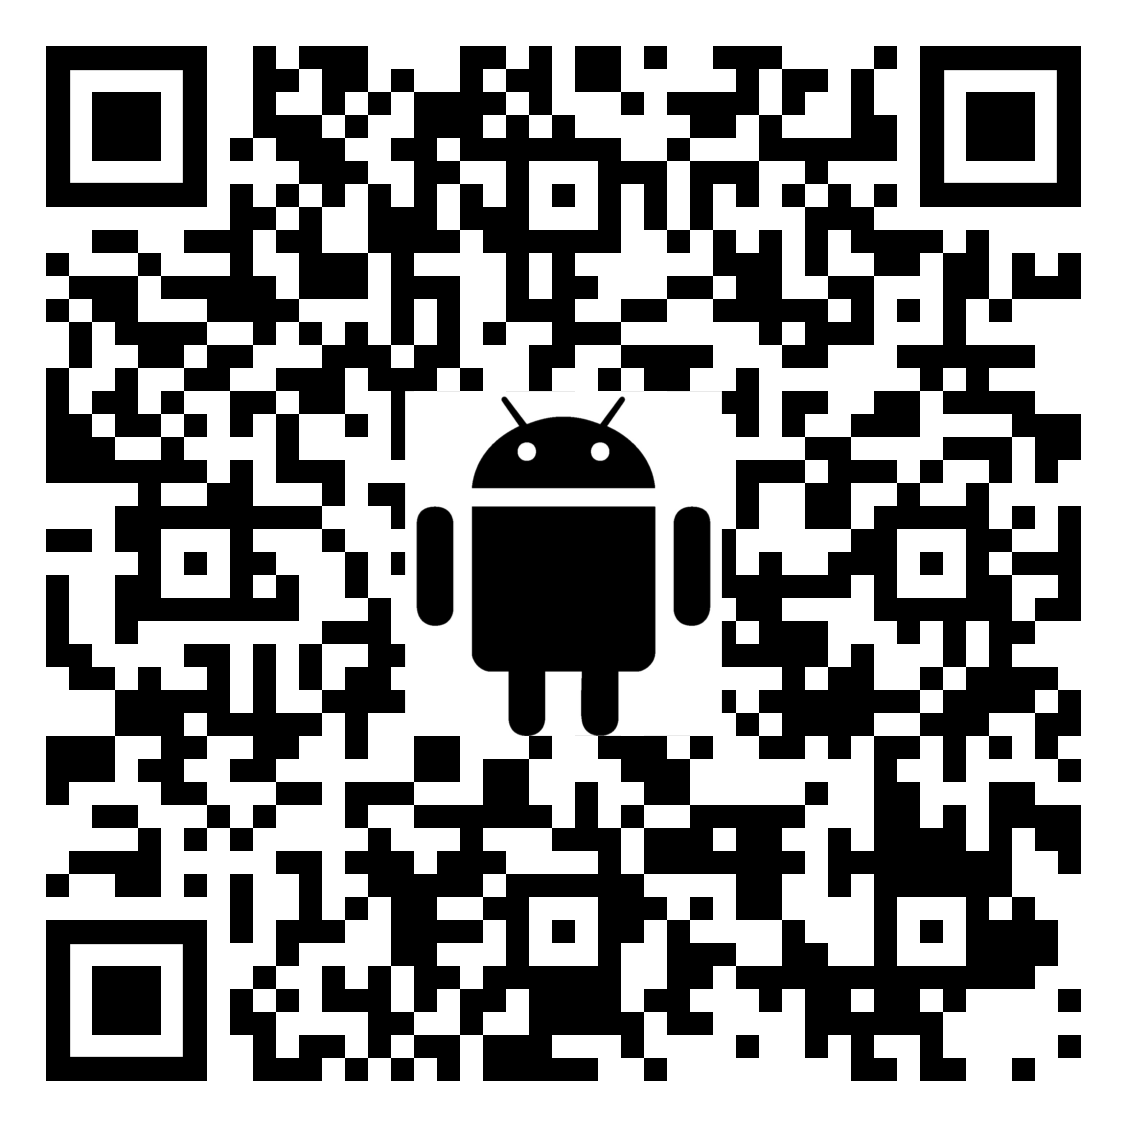 QR code for AccuView mobile app on Google Play